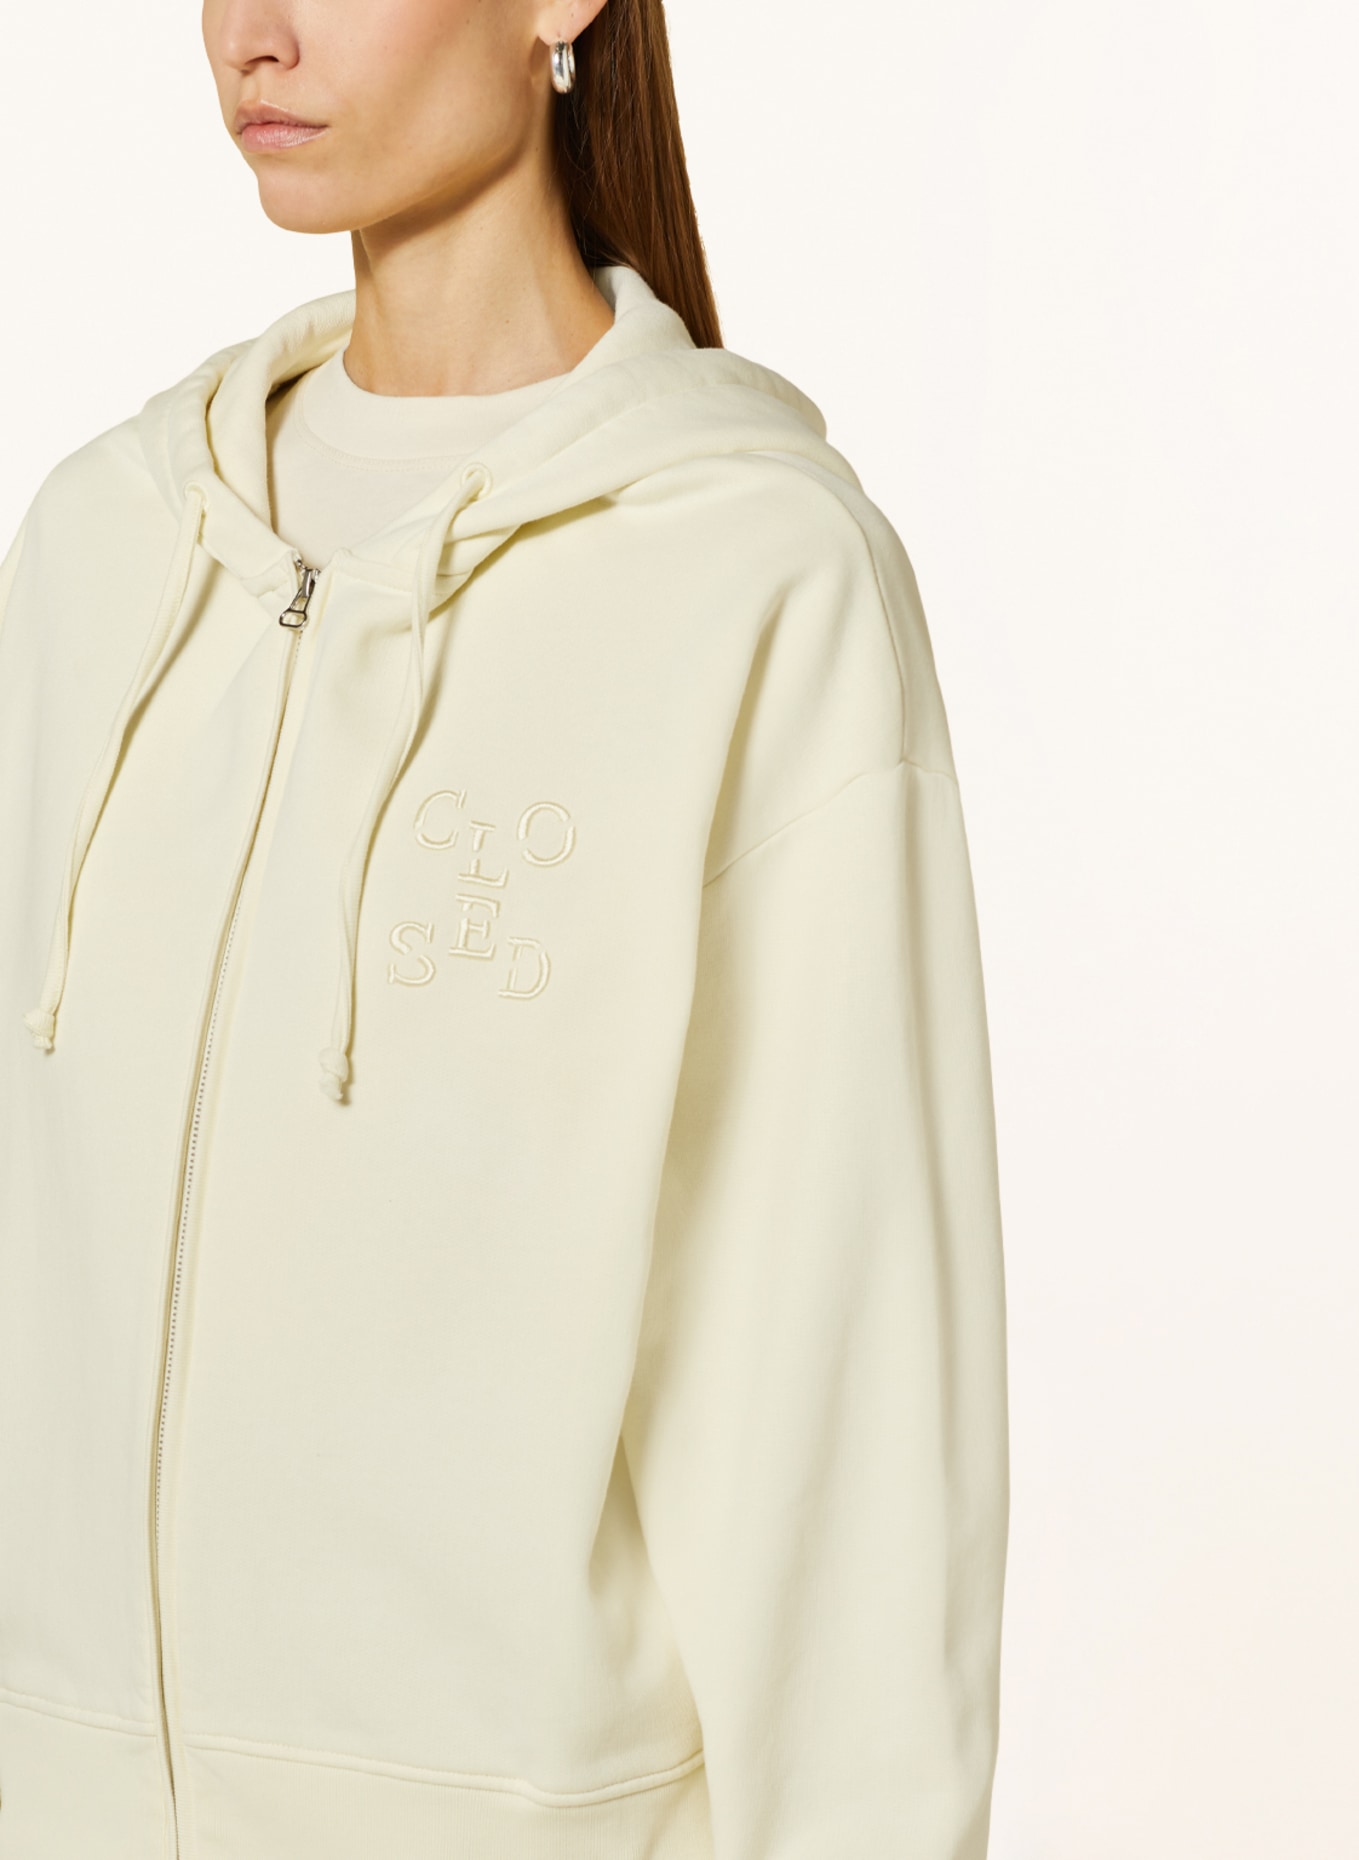 CLOSED Sweat jacket, Color: LIGHT GREEN (Image 5)